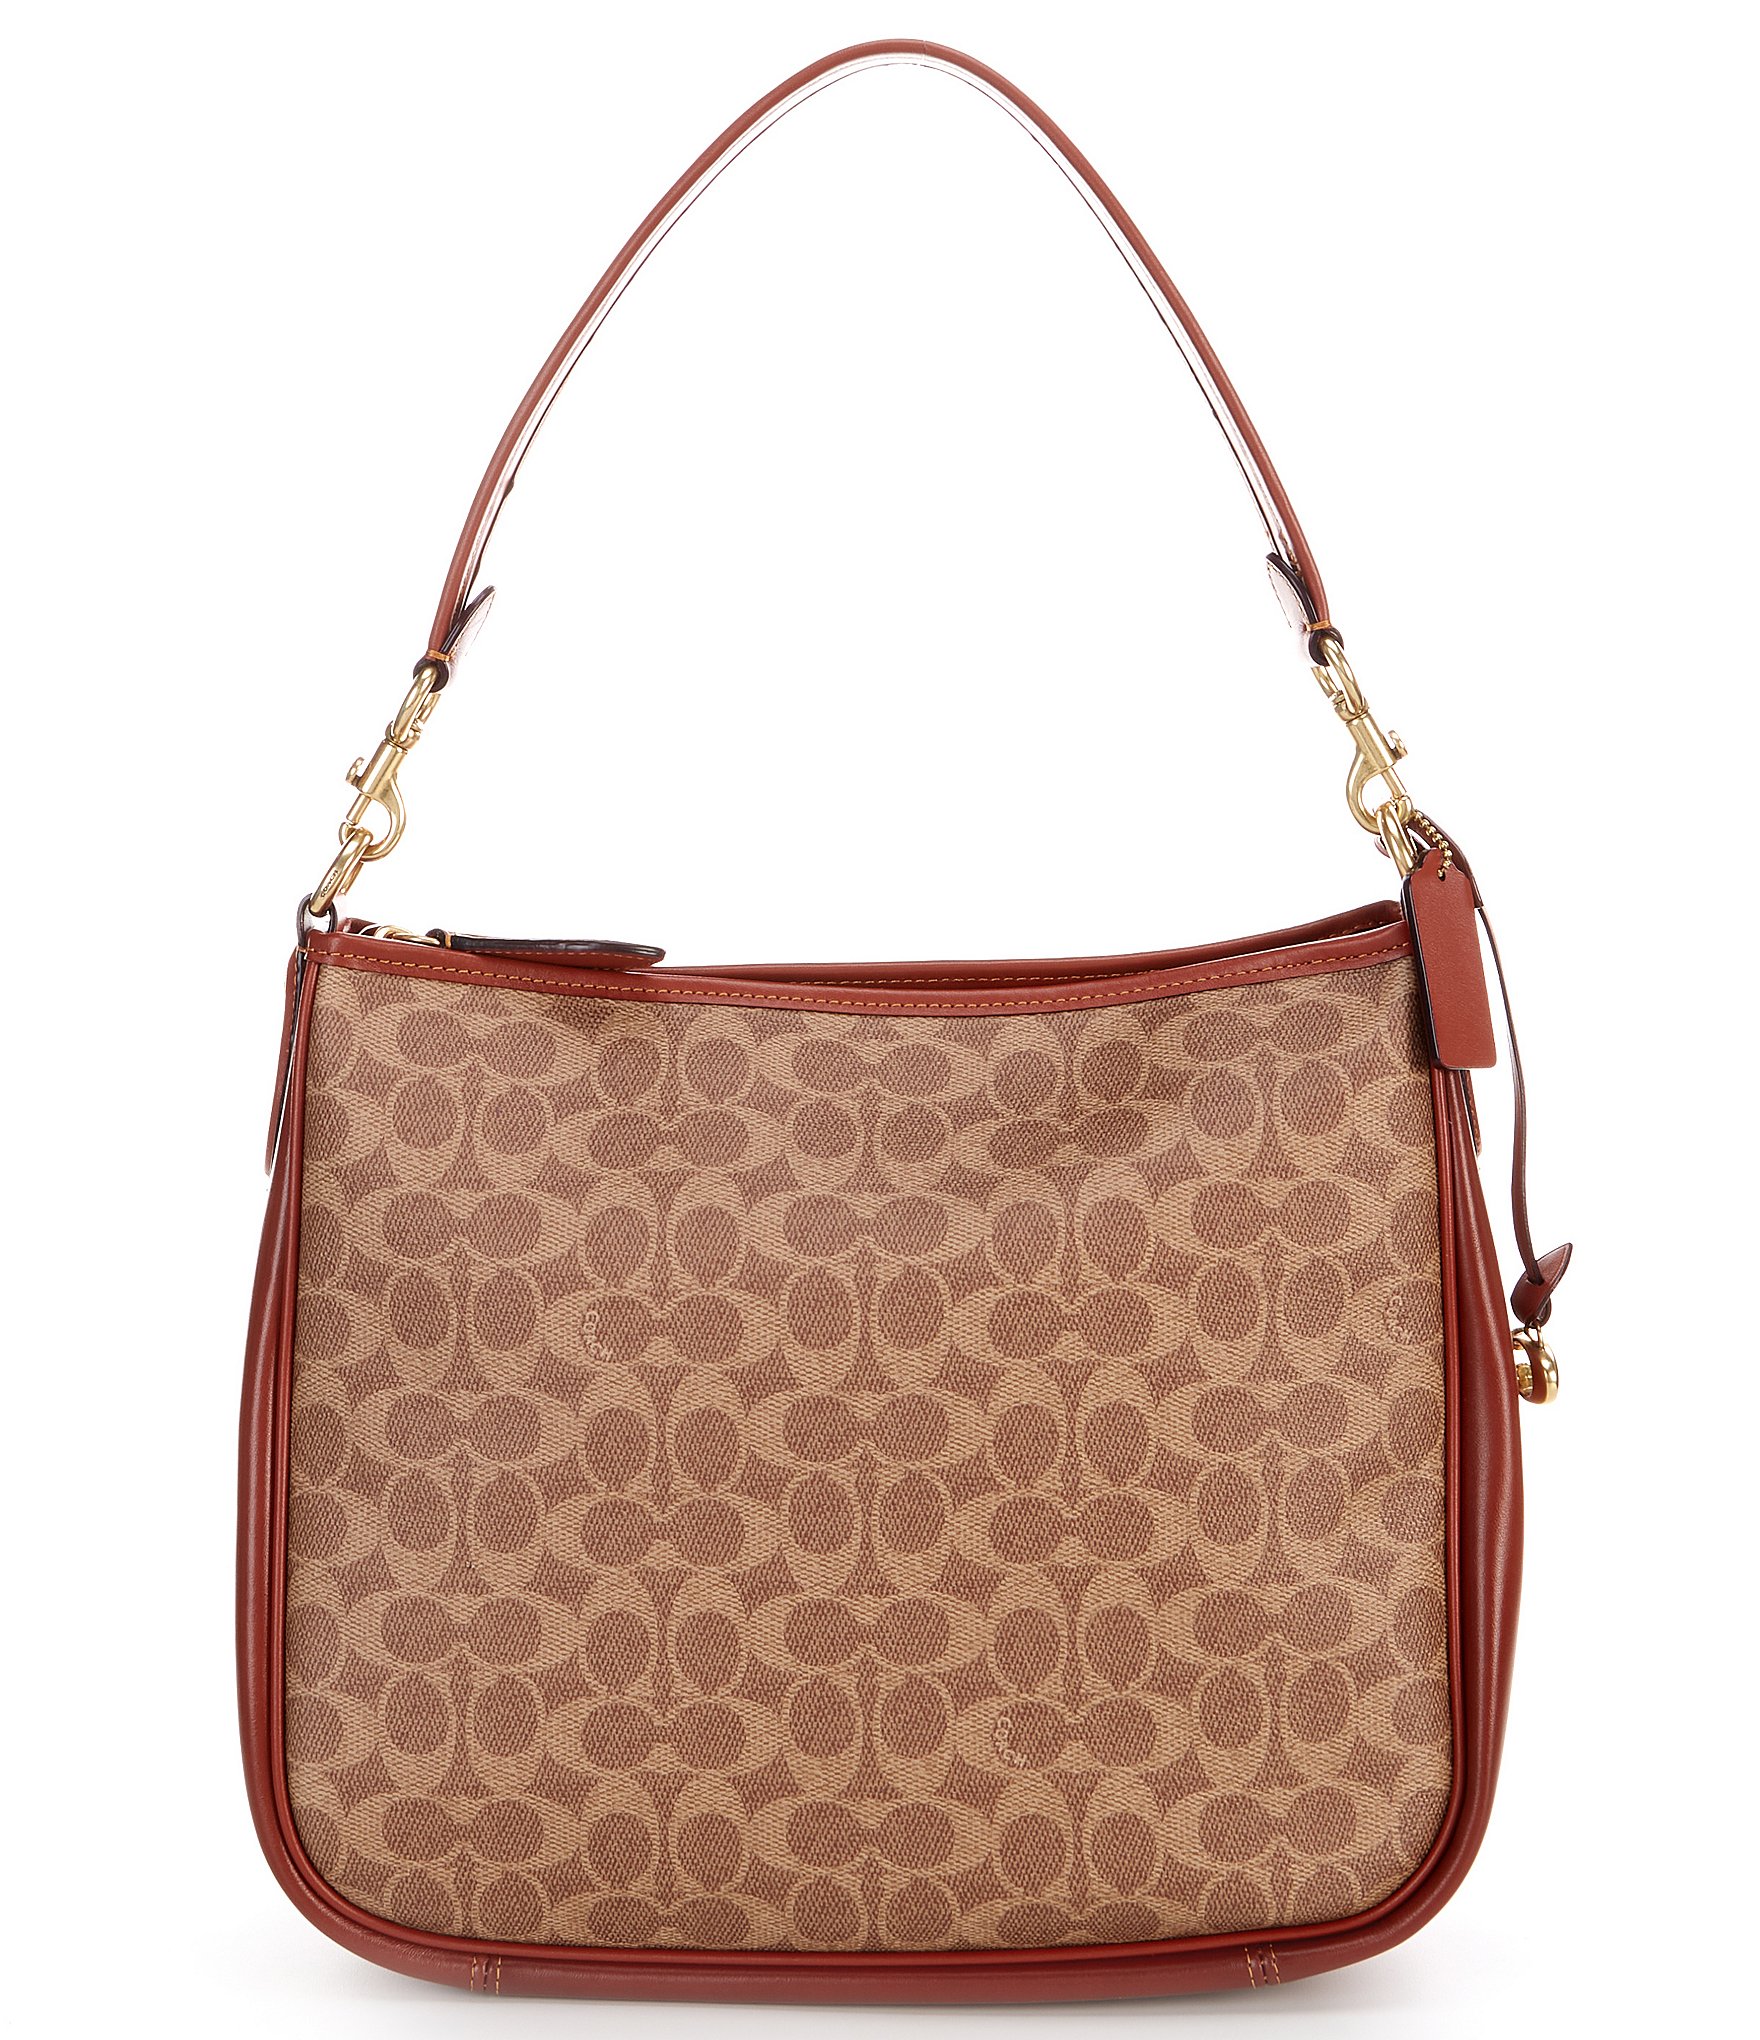 Coach Coated Canvas Signature Cary Crossbody, Tan Rust, One Size